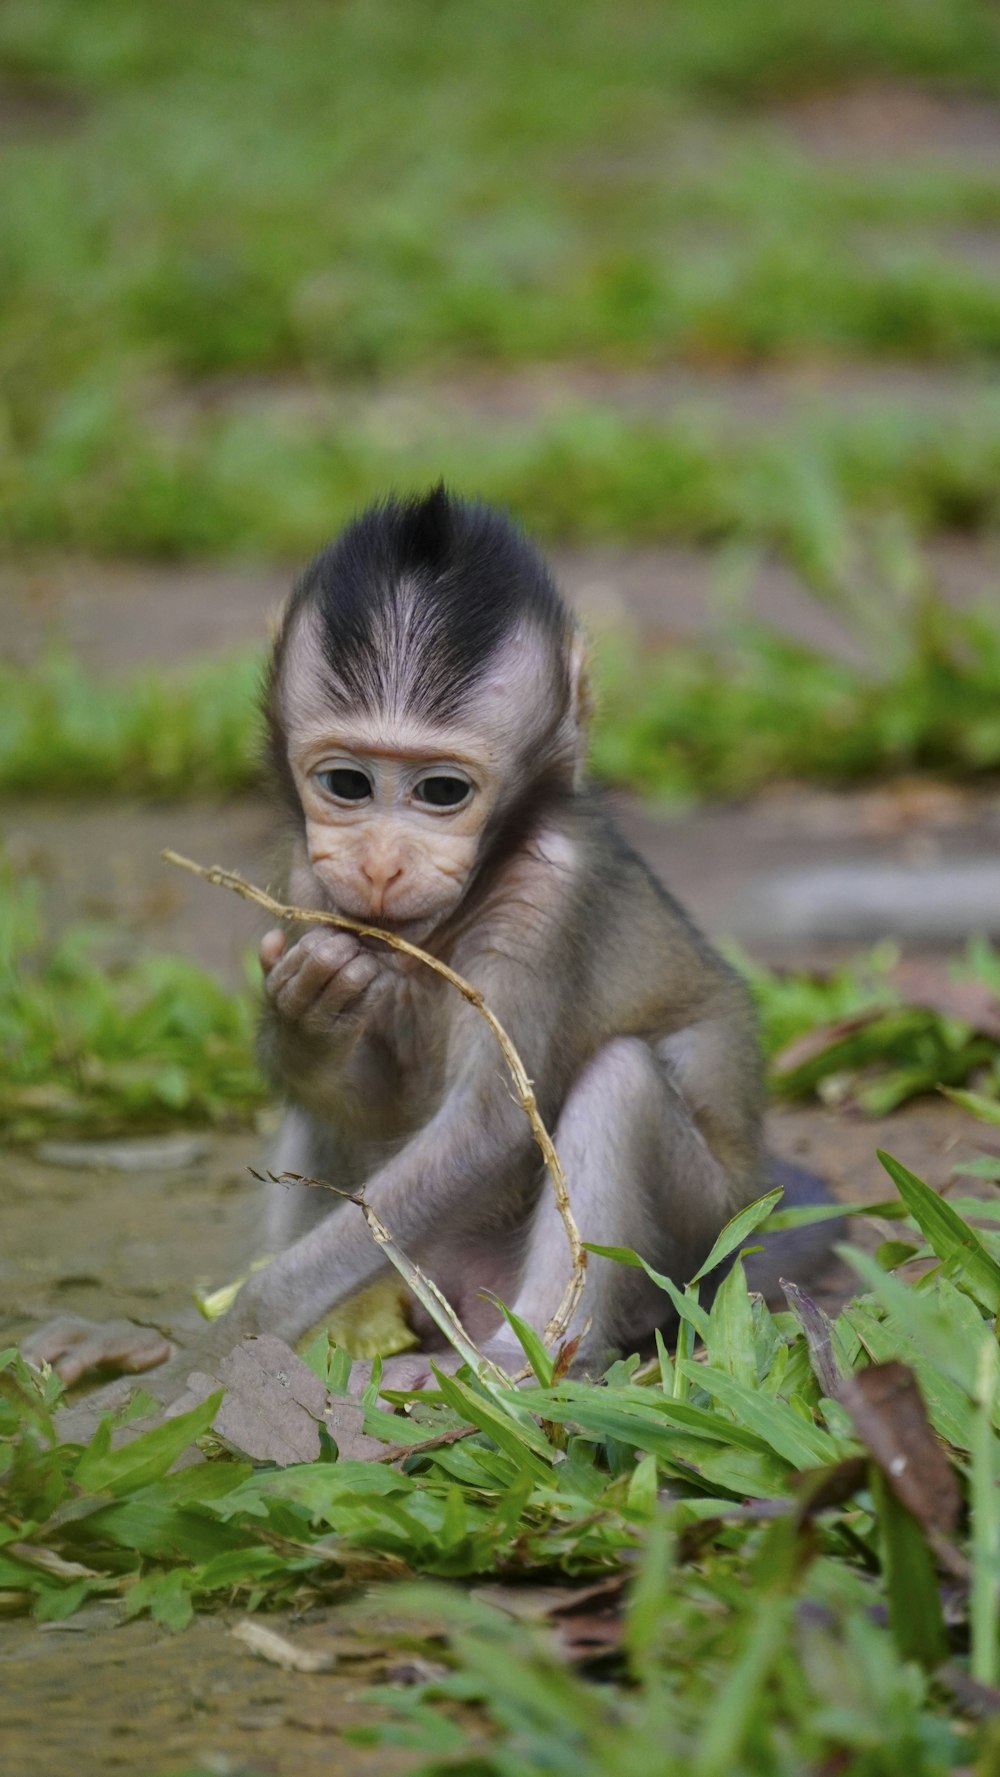 a baby monkey sitting on the ground with a stick in its mouth